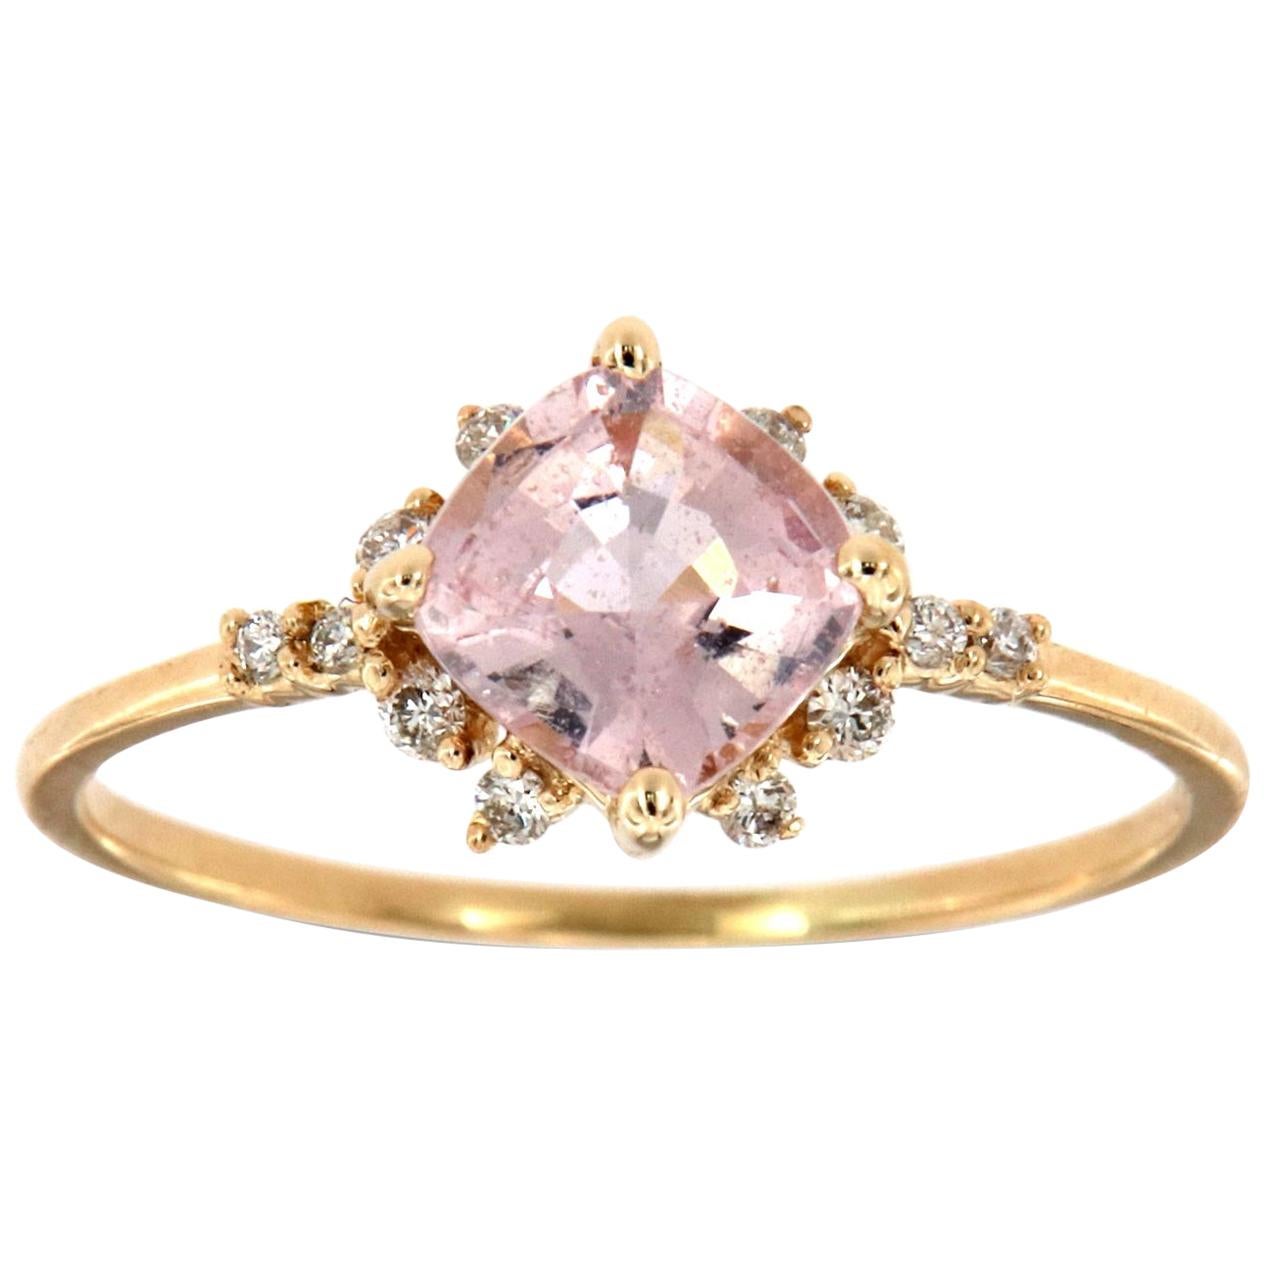 14K Yellow Gold Peach Sapphire and Diamond Ring Center-1.06 Carat GIA Unheated For Sale